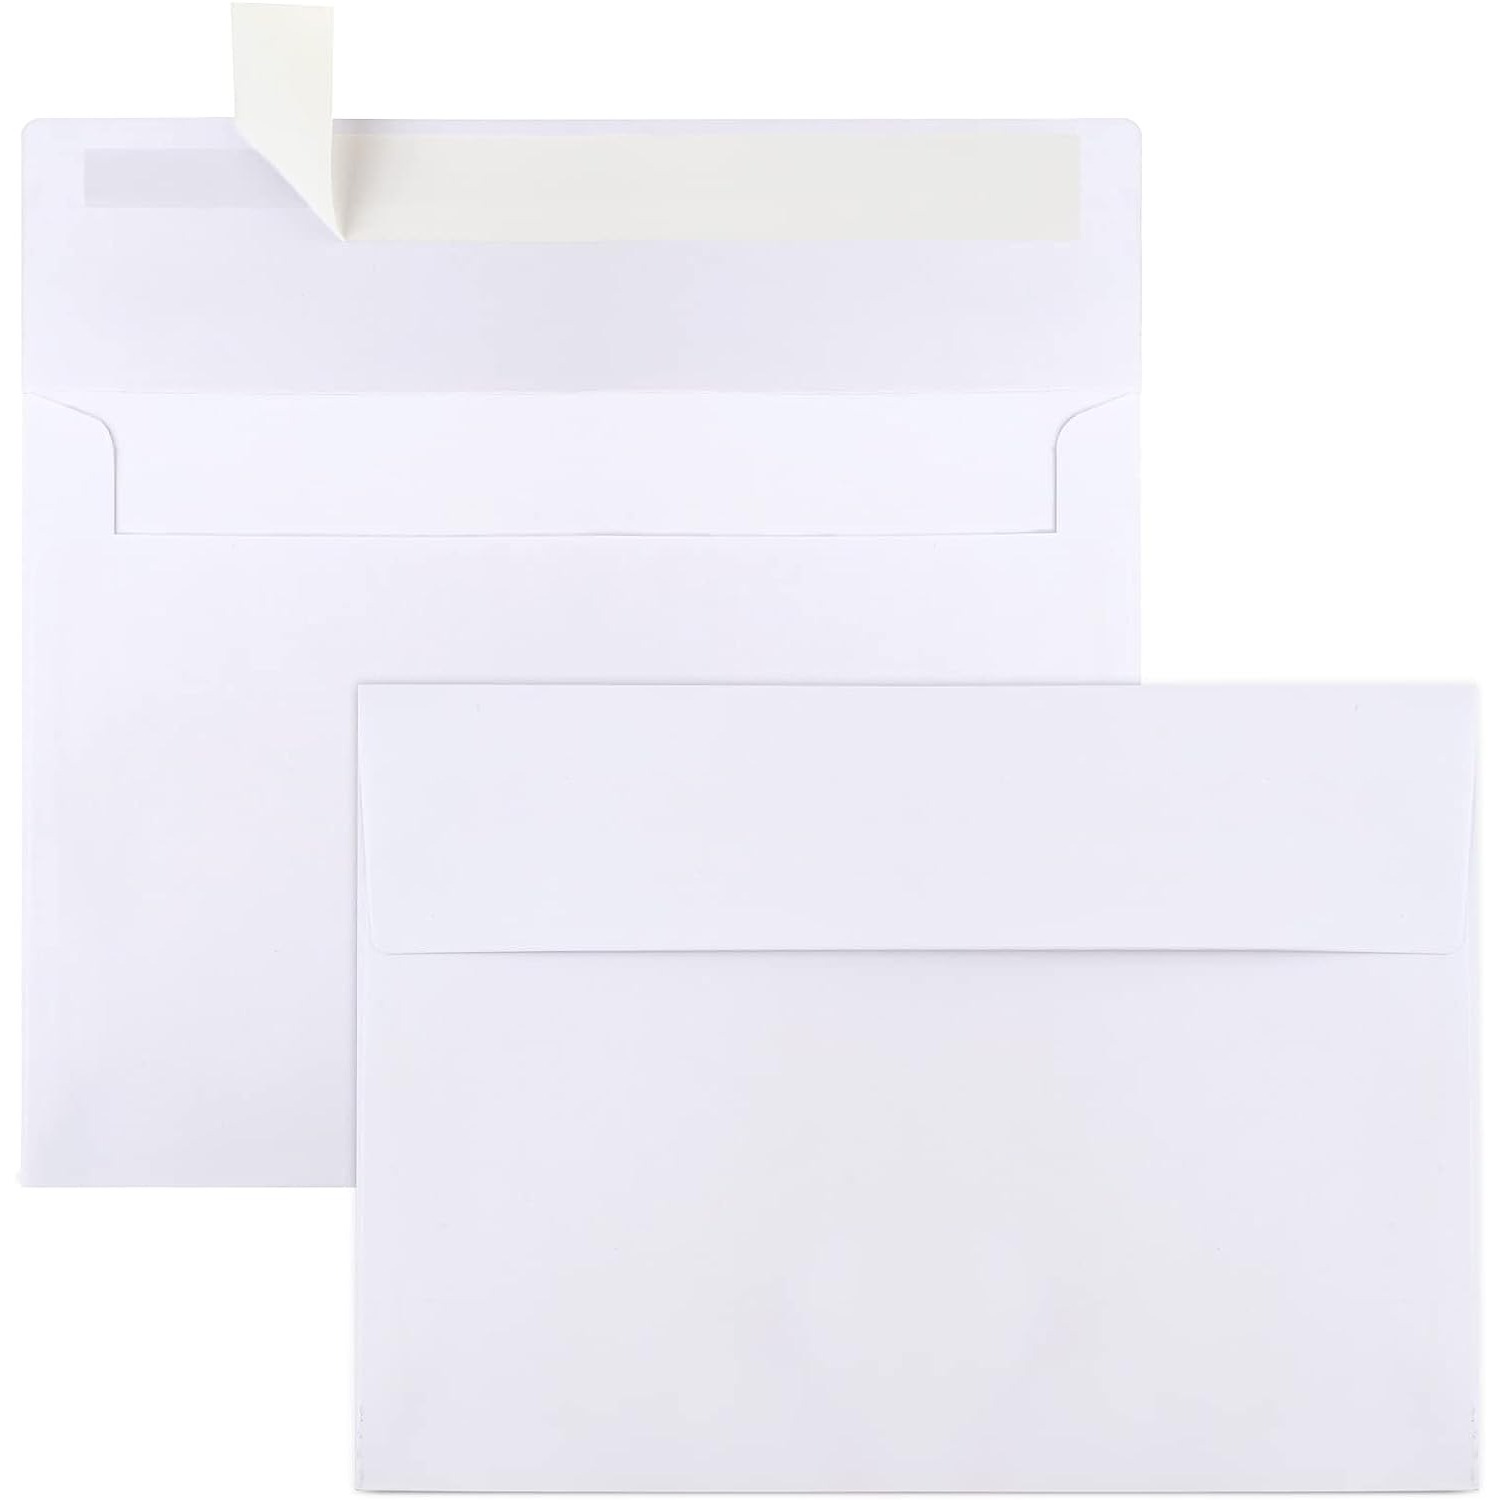 Blank Greeting Cards & Envelopes A7 5x7